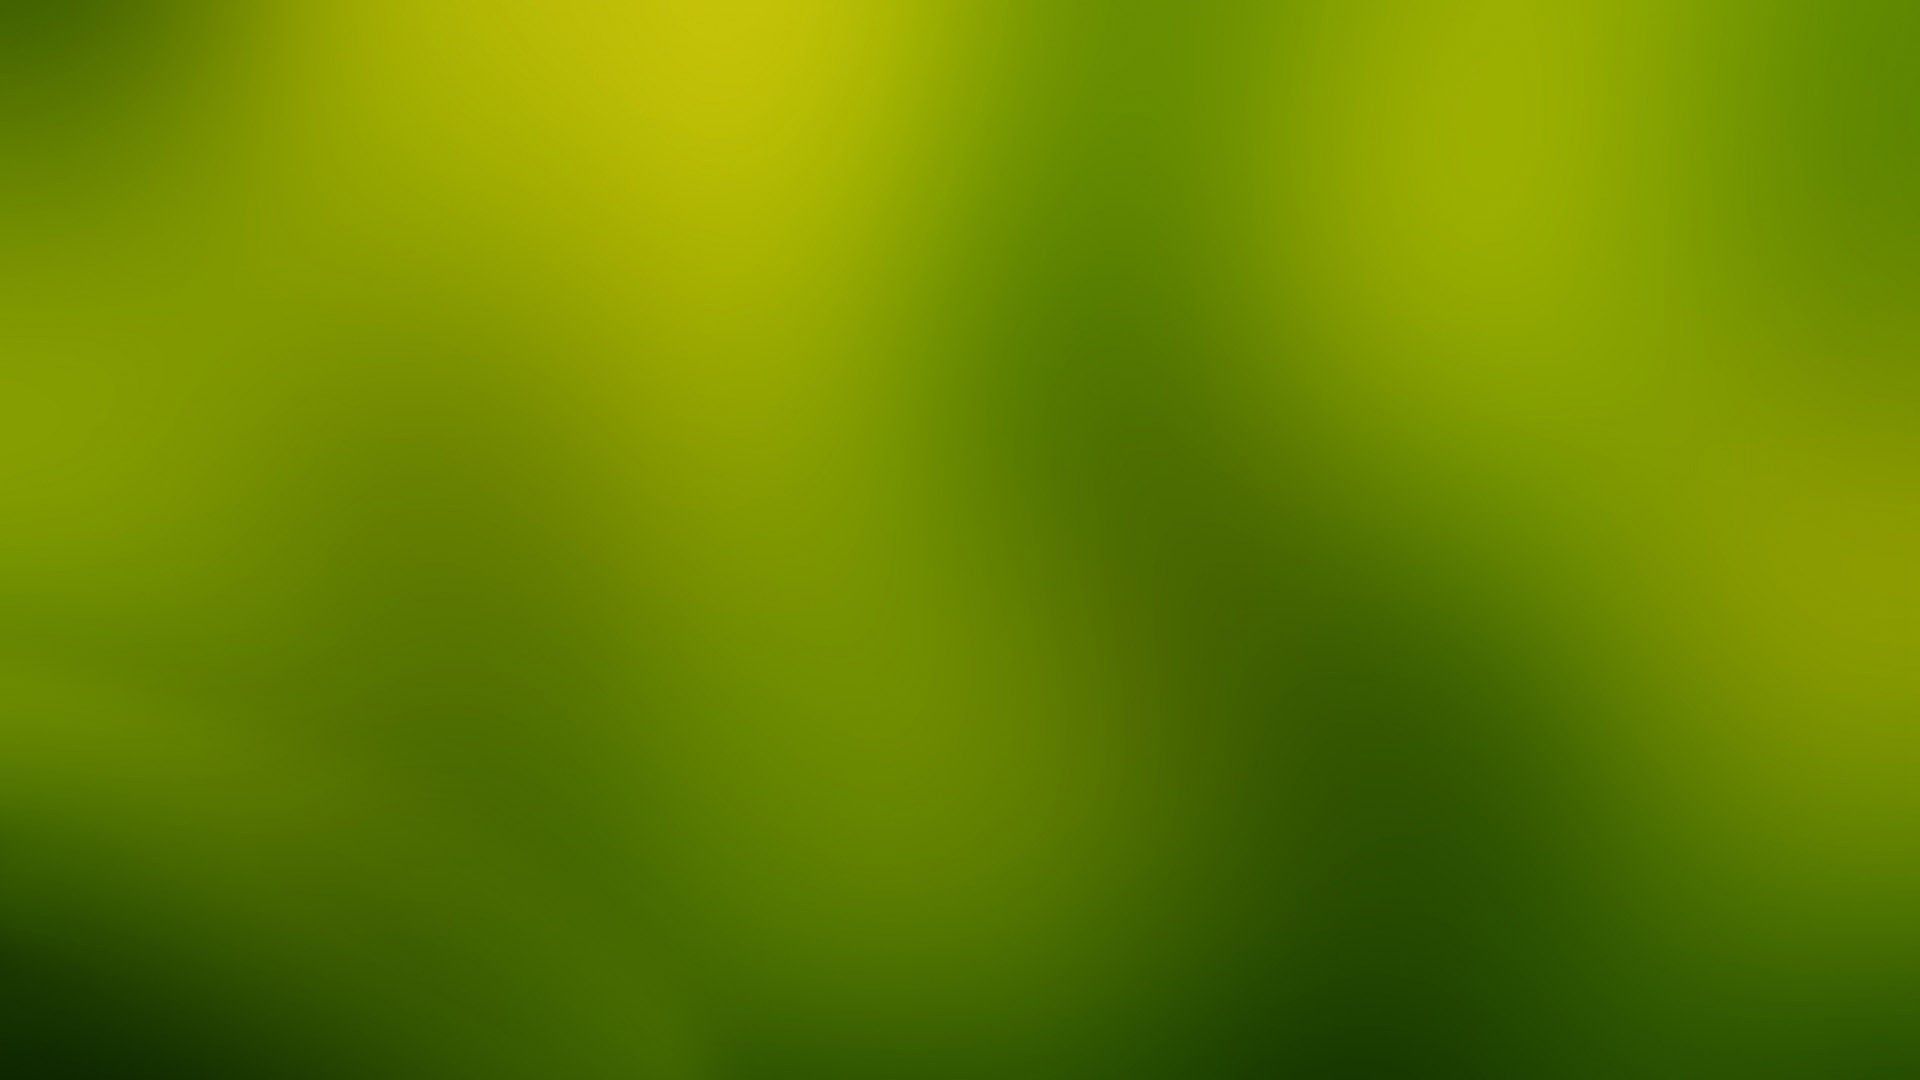 Natural Green Blurred Background  Free Stock Images  Photos  19410575   StockFreeImagescom